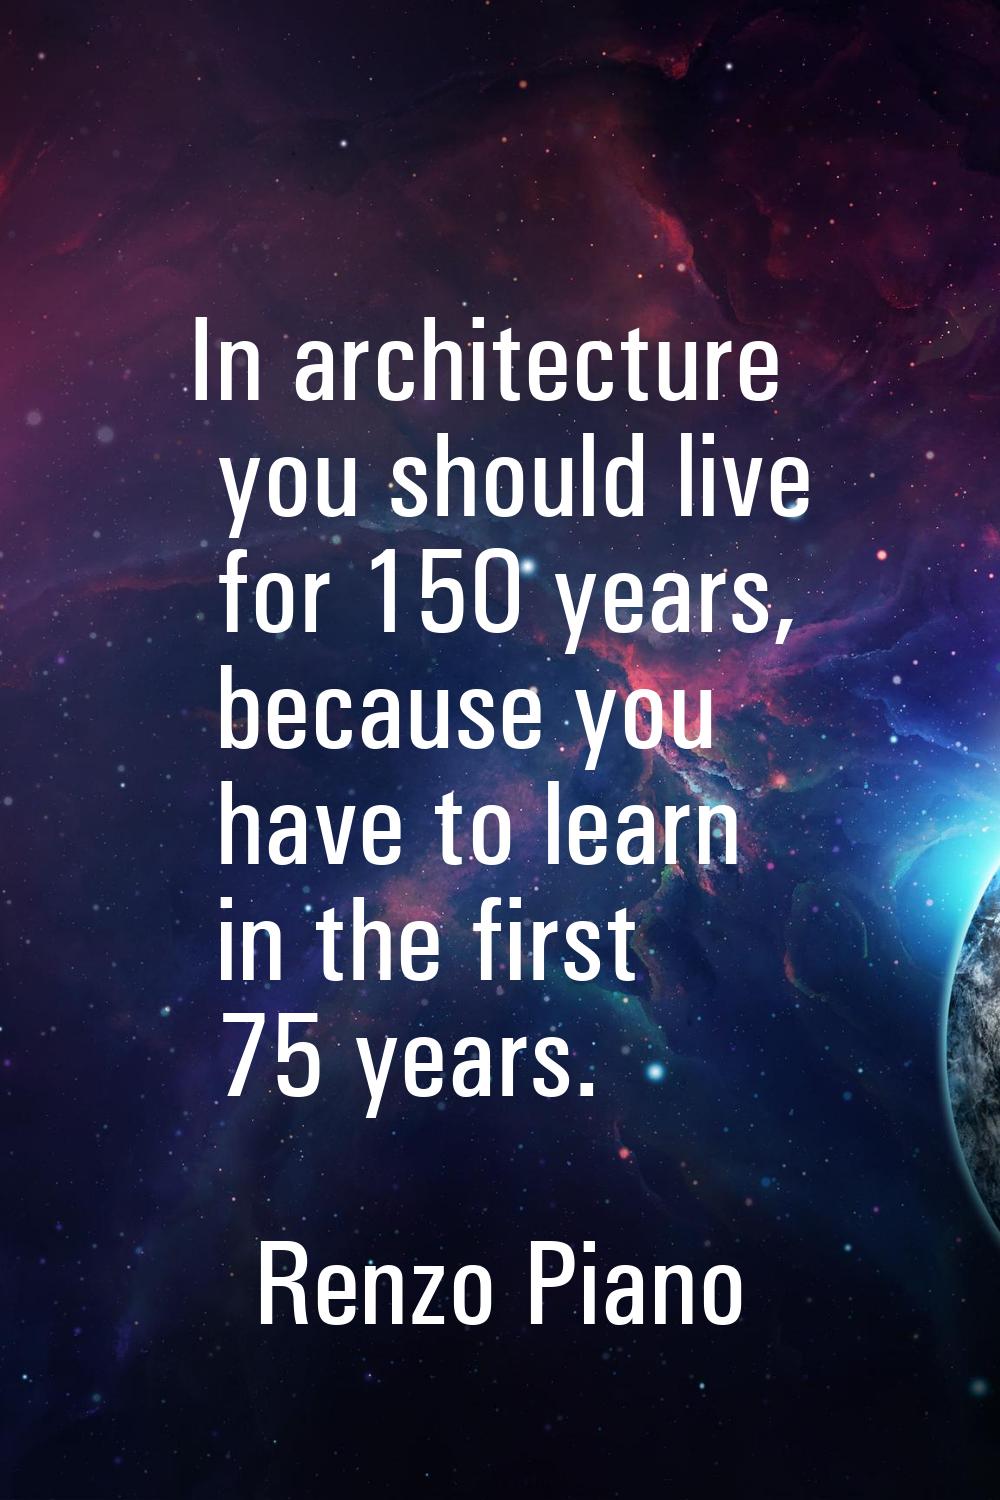 In architecture you should live for 150 years, because you have to learn in the first 75 years.